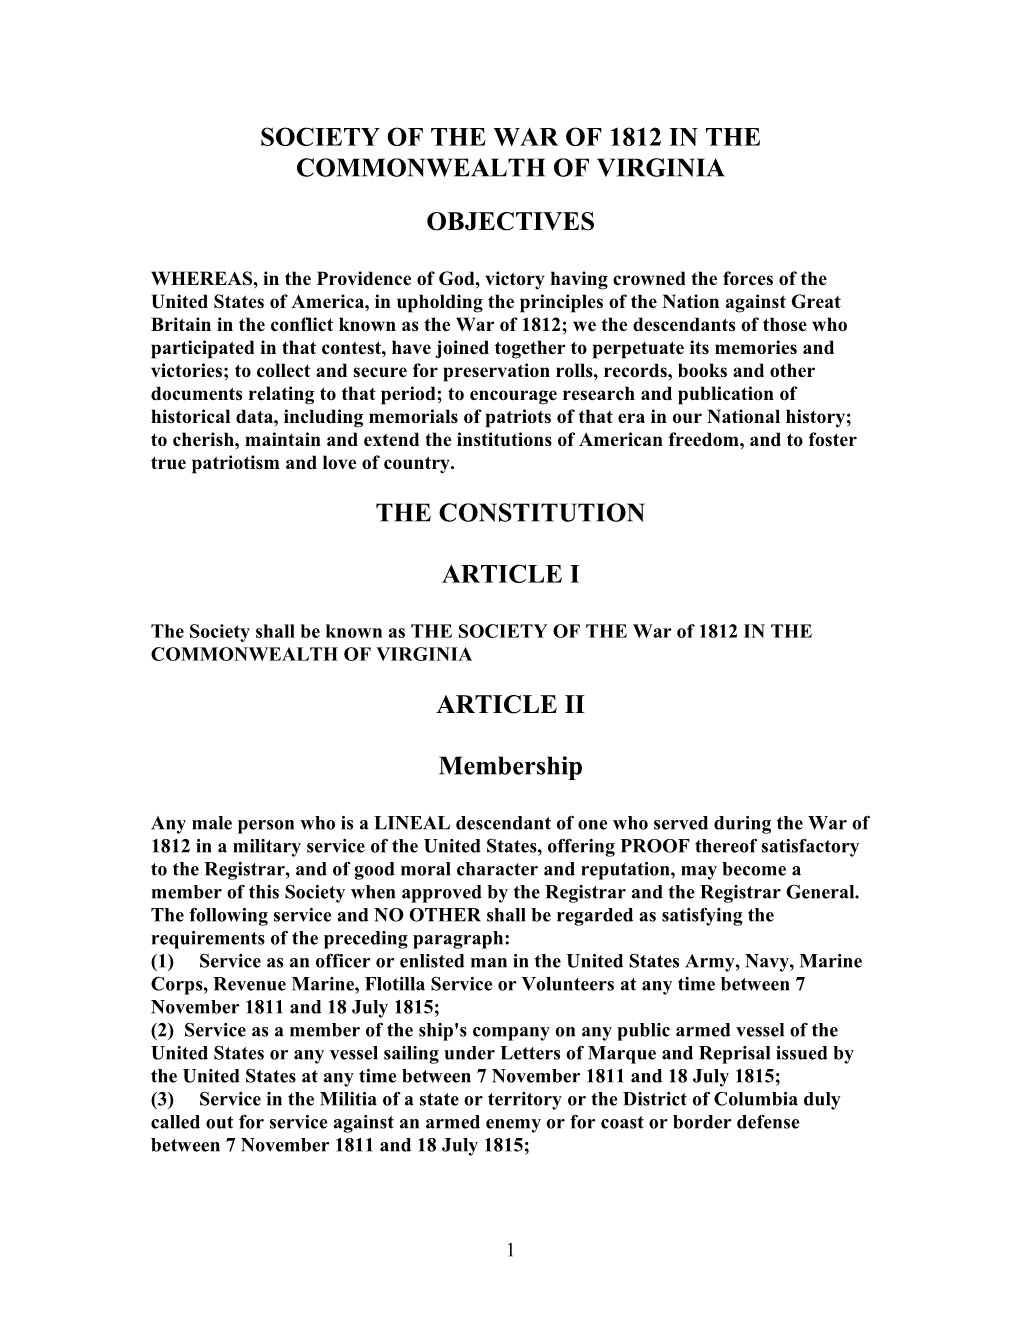 Society of the War of 1812 in the Commonwealth of Virginia